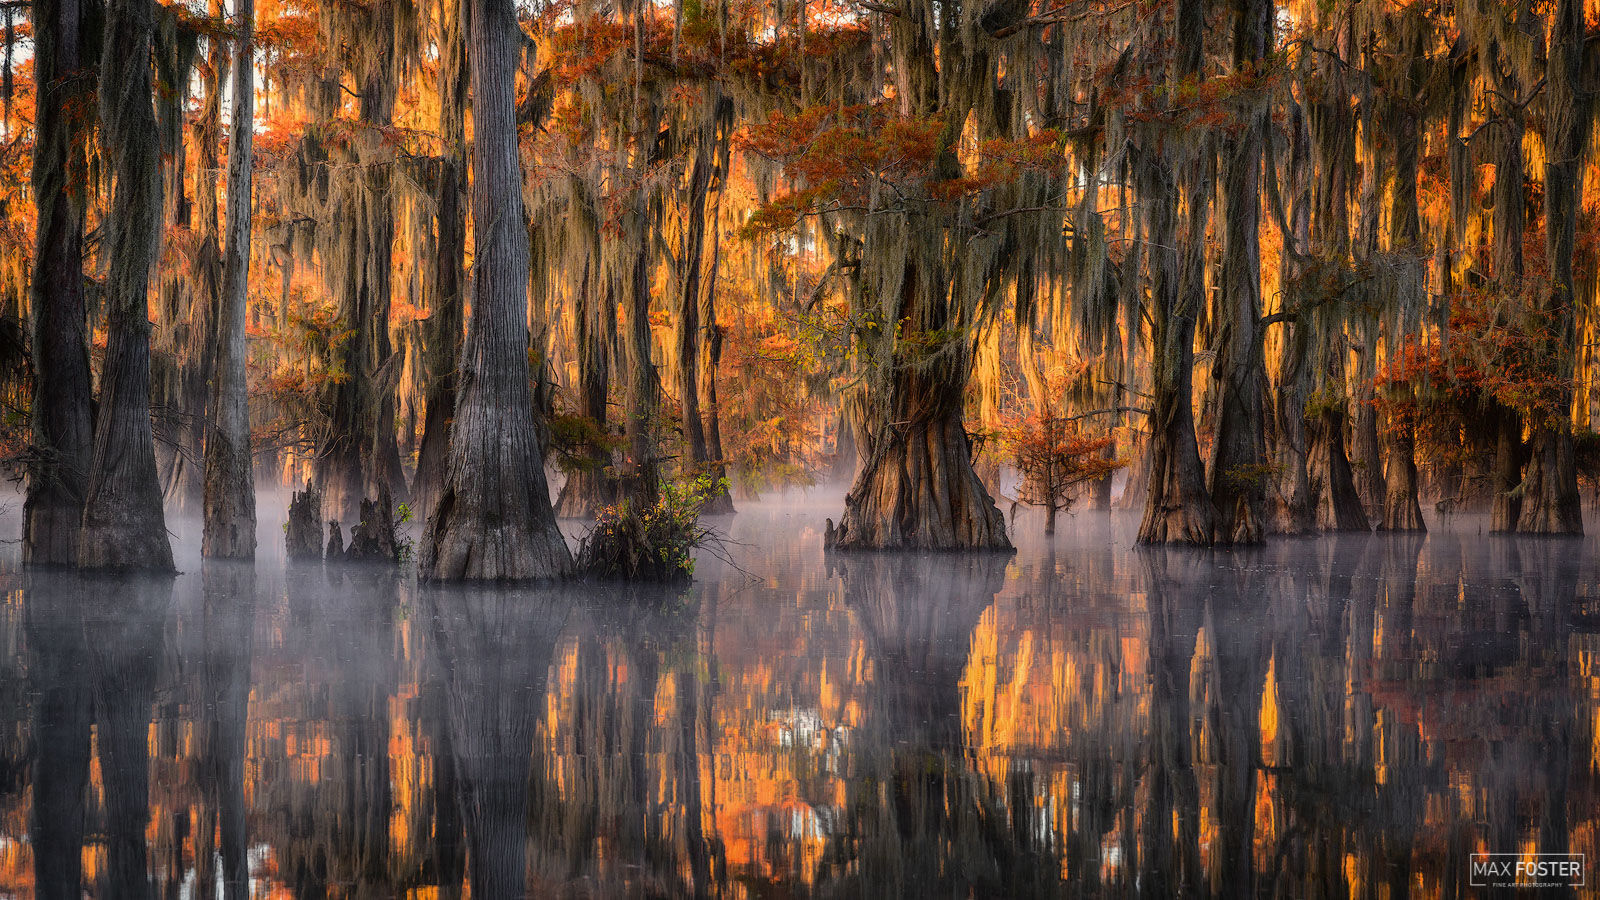 Bring your walls to life with Bayou Drapery, Max Foster's limited edition photography print of bald cypress in Caddo Lake, Texas...